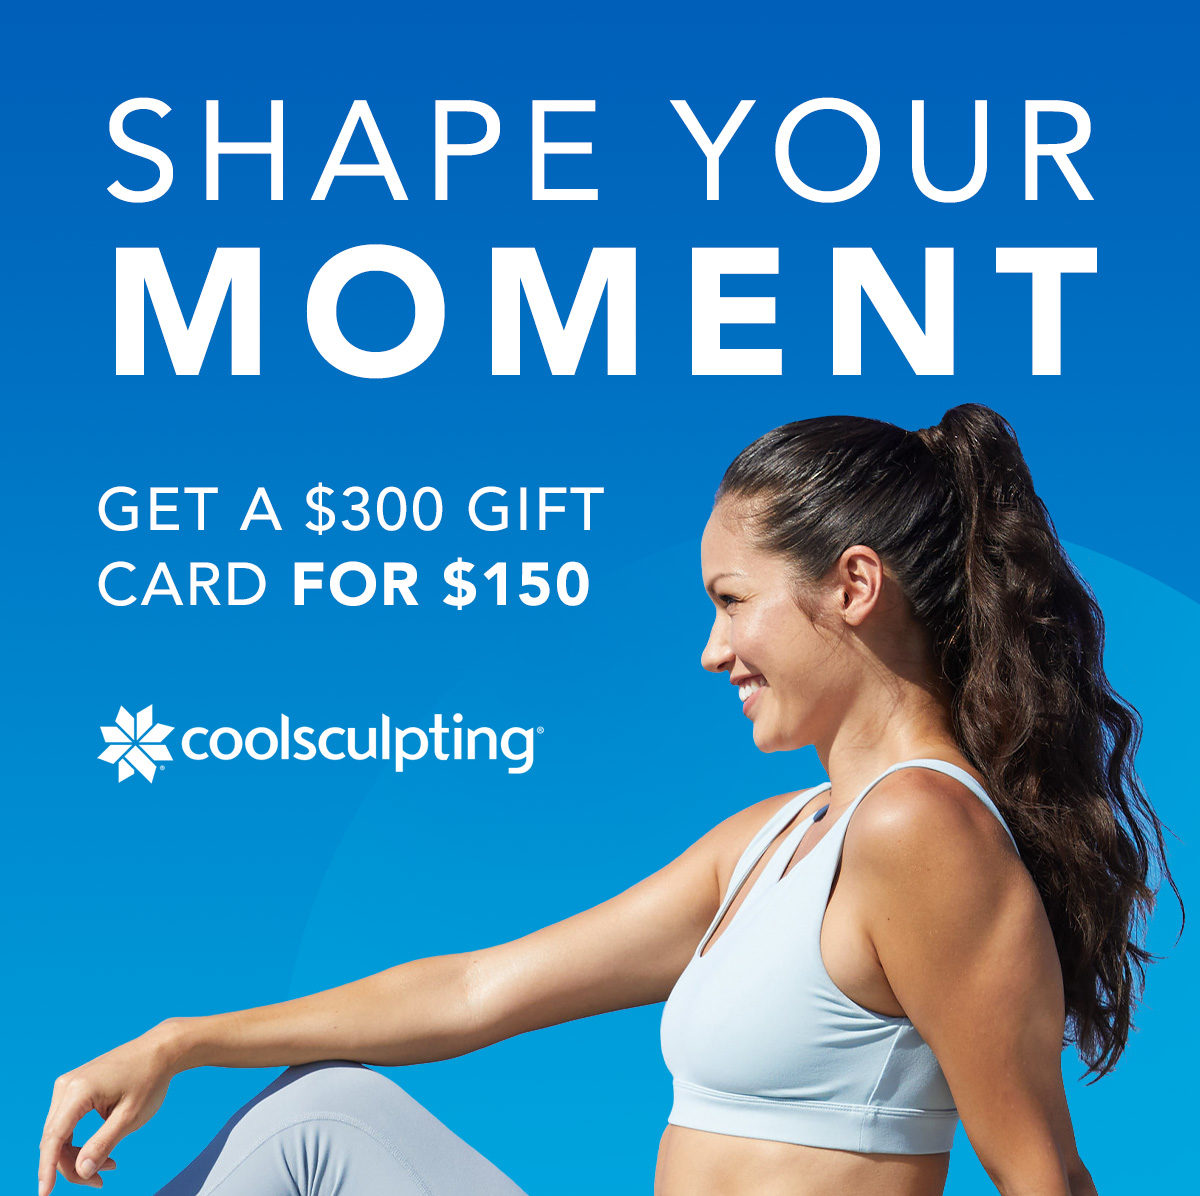 shape your moment with coolsculpting